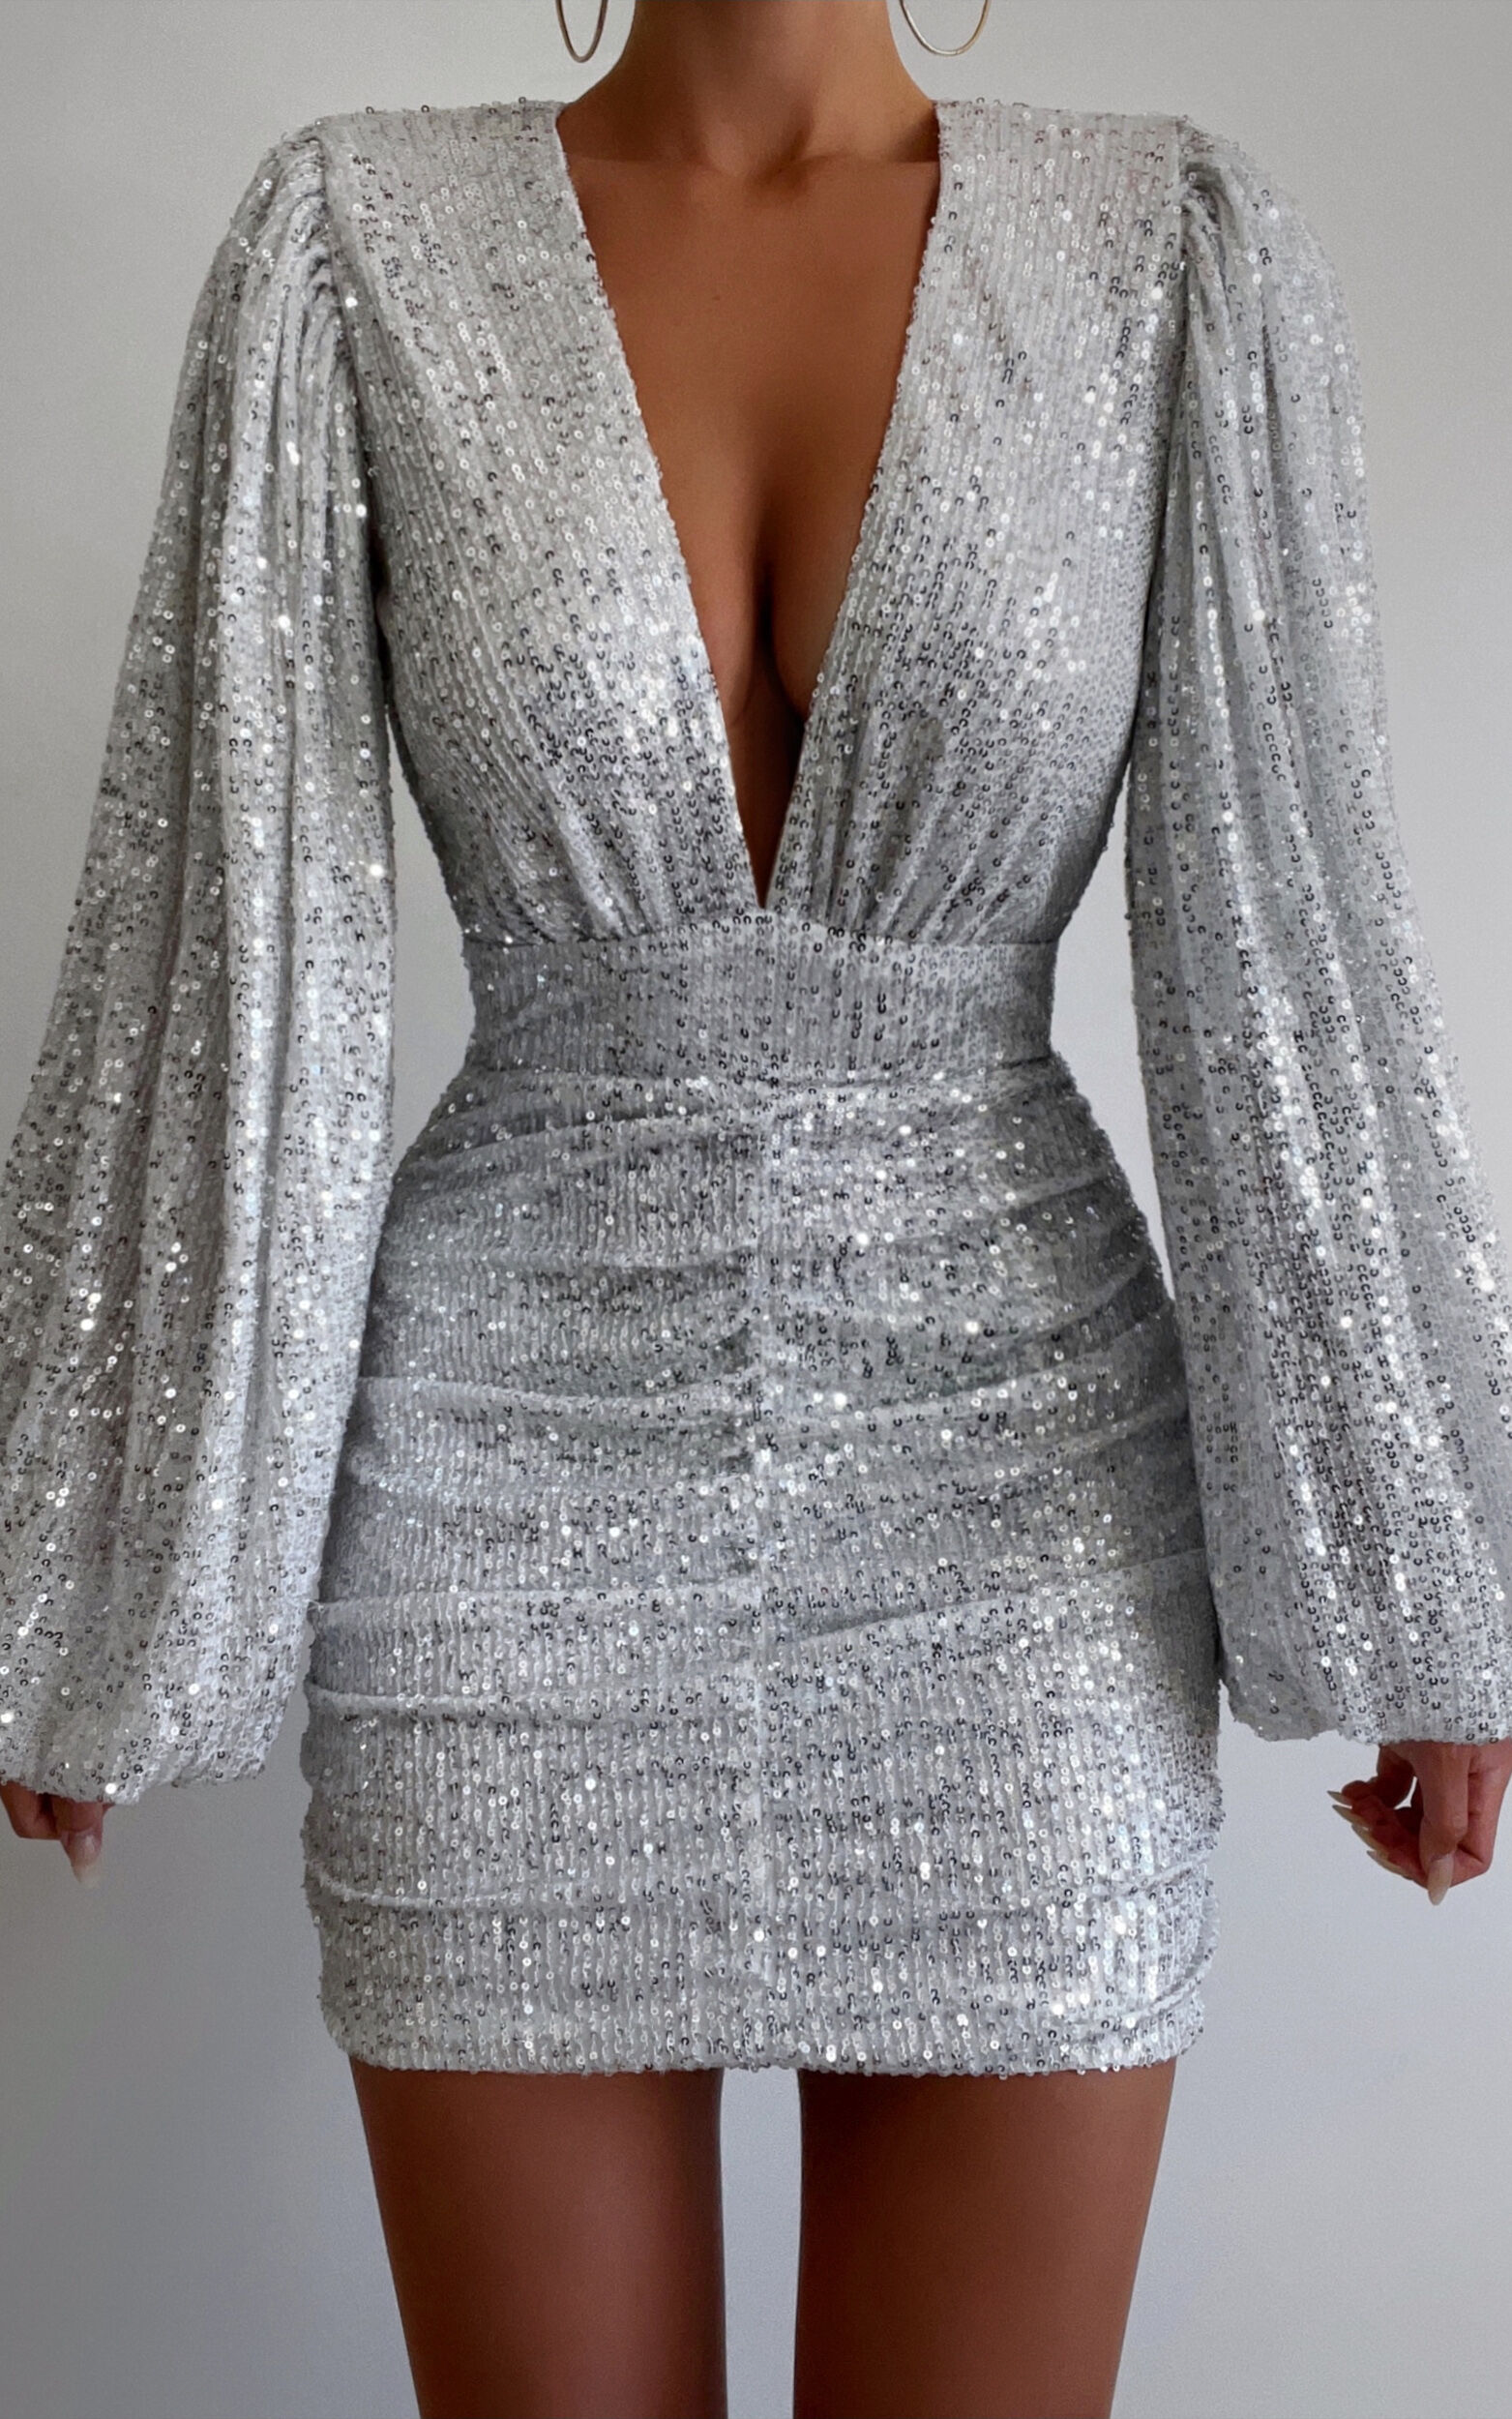 Rhylee Mini Dress - Long Sleeve Ruched Dress in Silver Sequin - Showpo Bodycon Dresses | Cyber Monday Sale